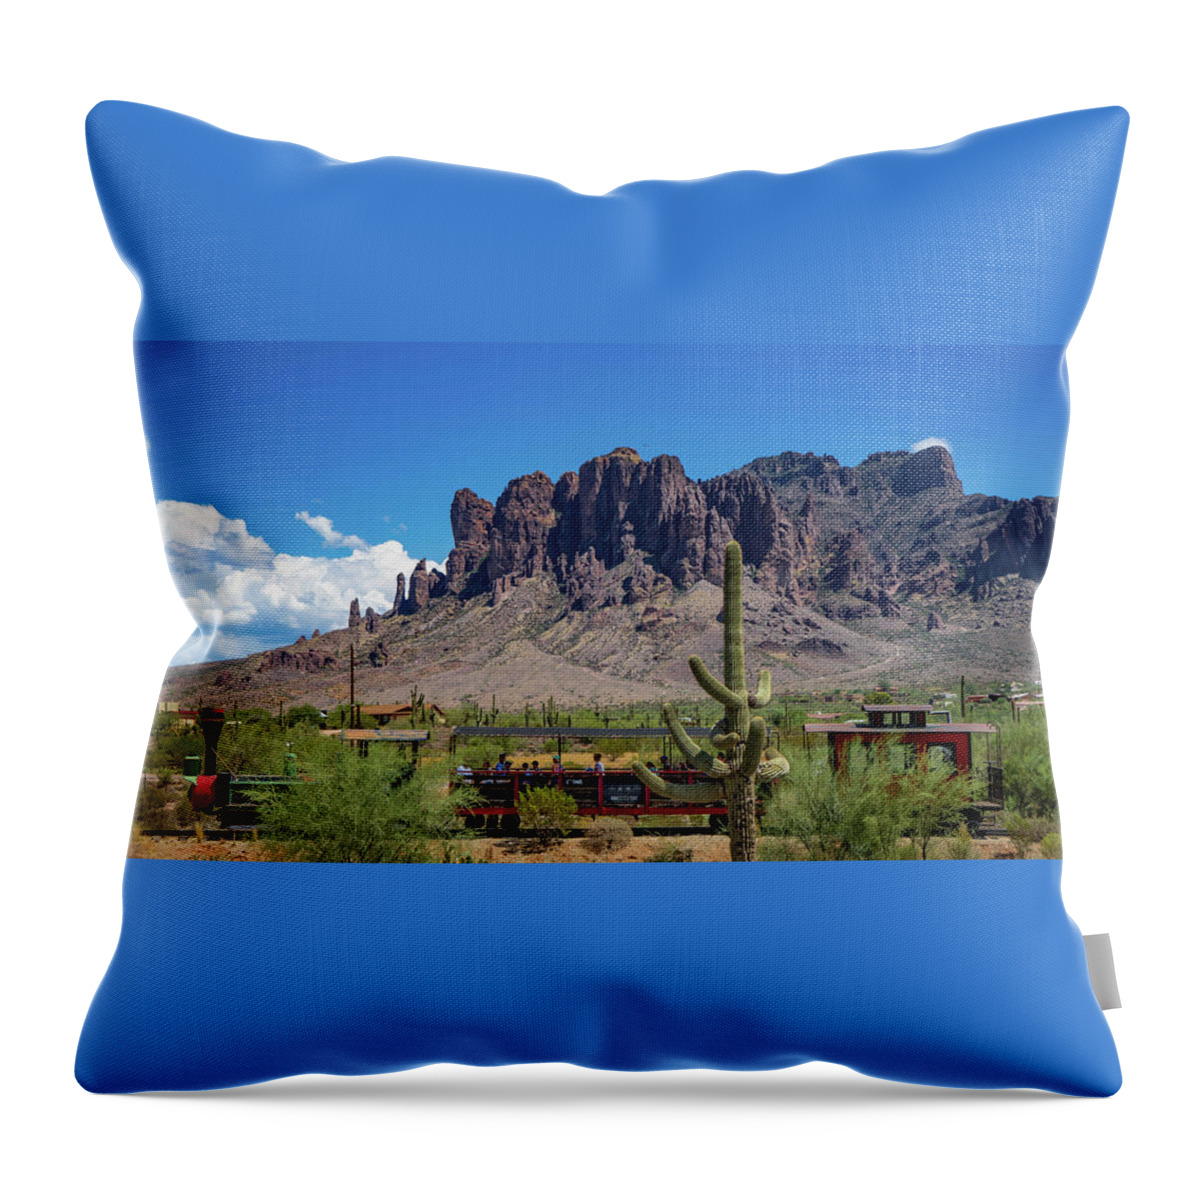 Superstition Mountain Throw Pillow featuring the photograph Superstition Mountain by Craig Watanabe